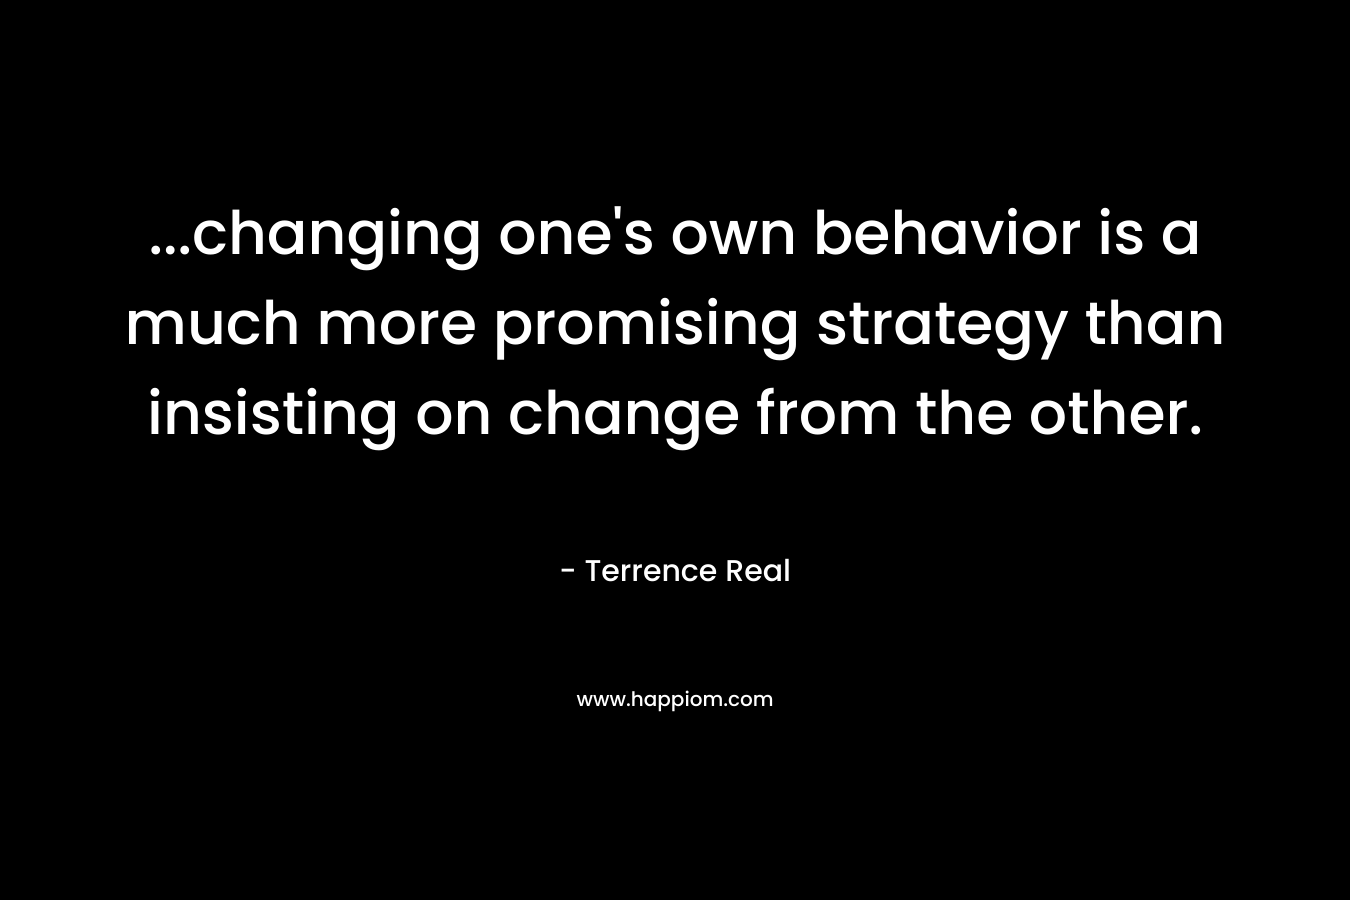 ...changing one's own behavior is a much more promising strategy than insisting on change from the other.